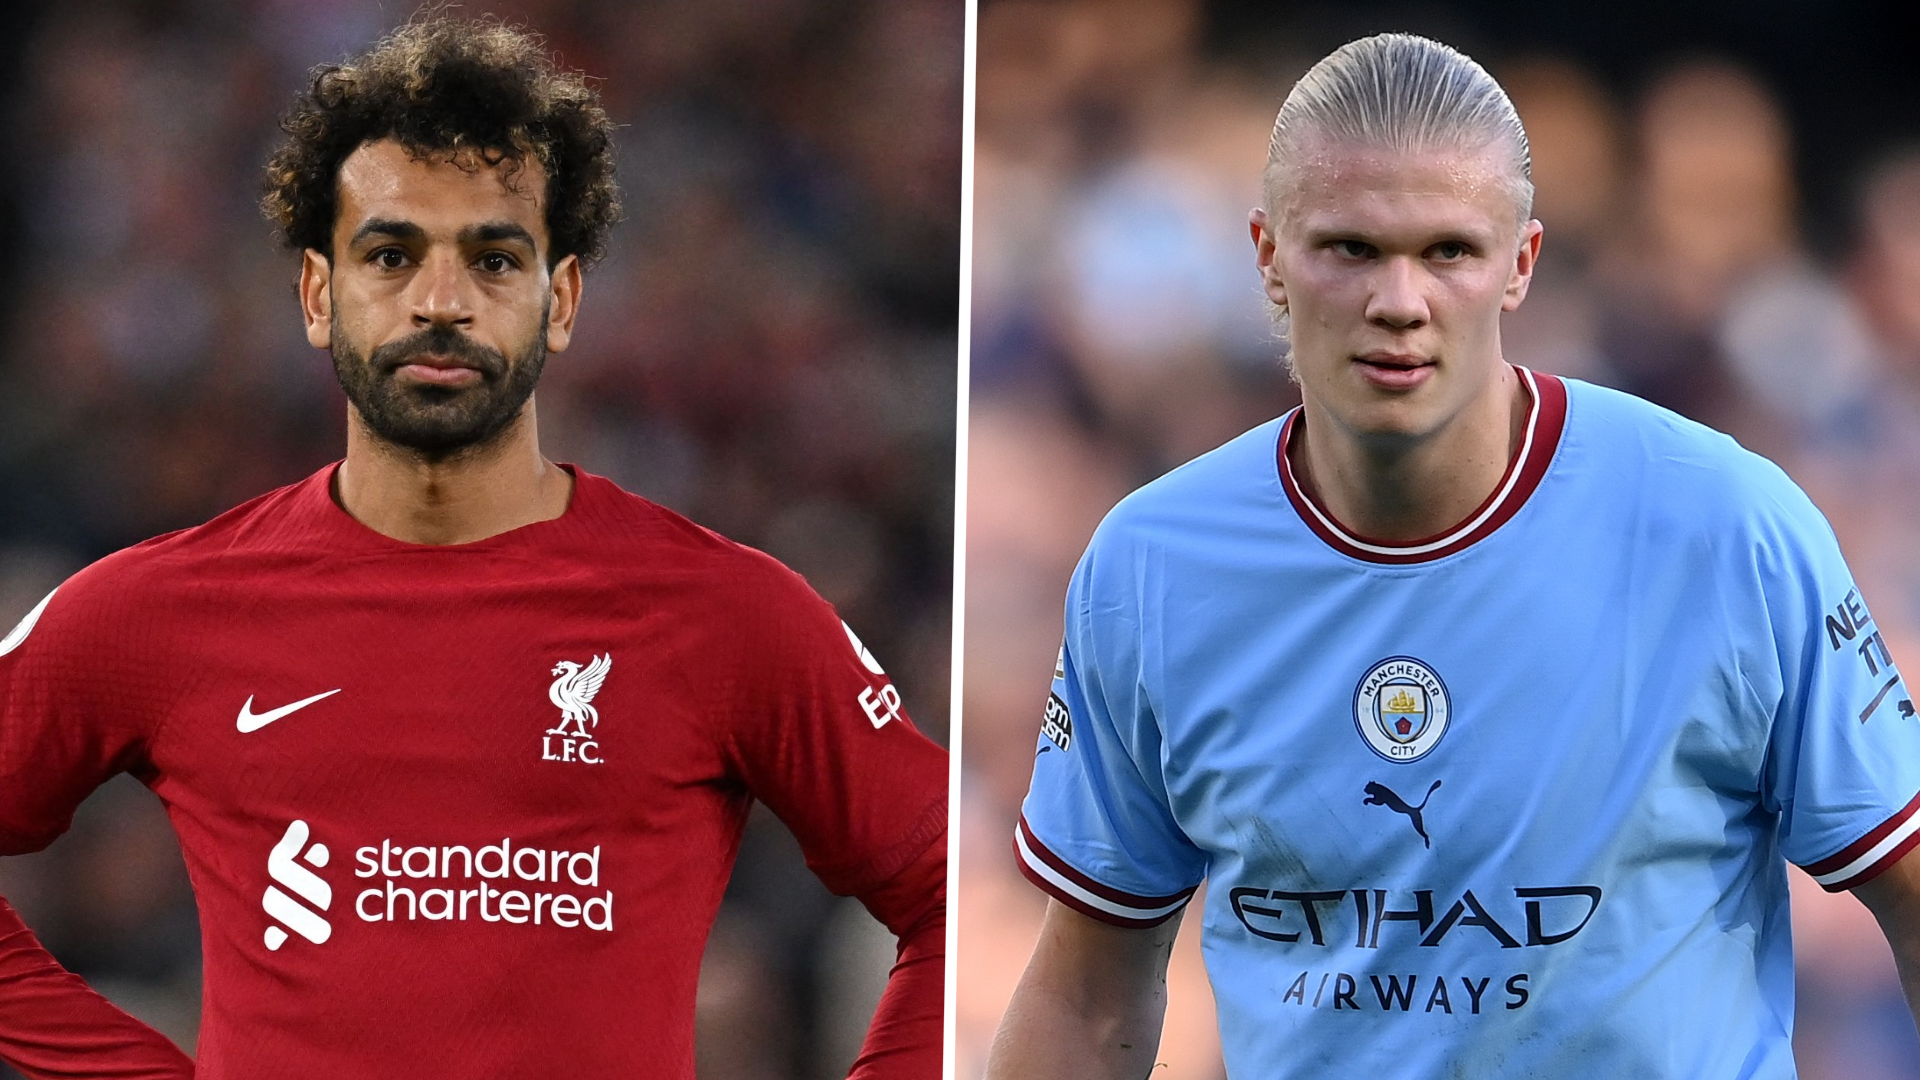 Manchester City vs Liverpool Where to watch the match online, live stream, TV channels and kick-off time Goal